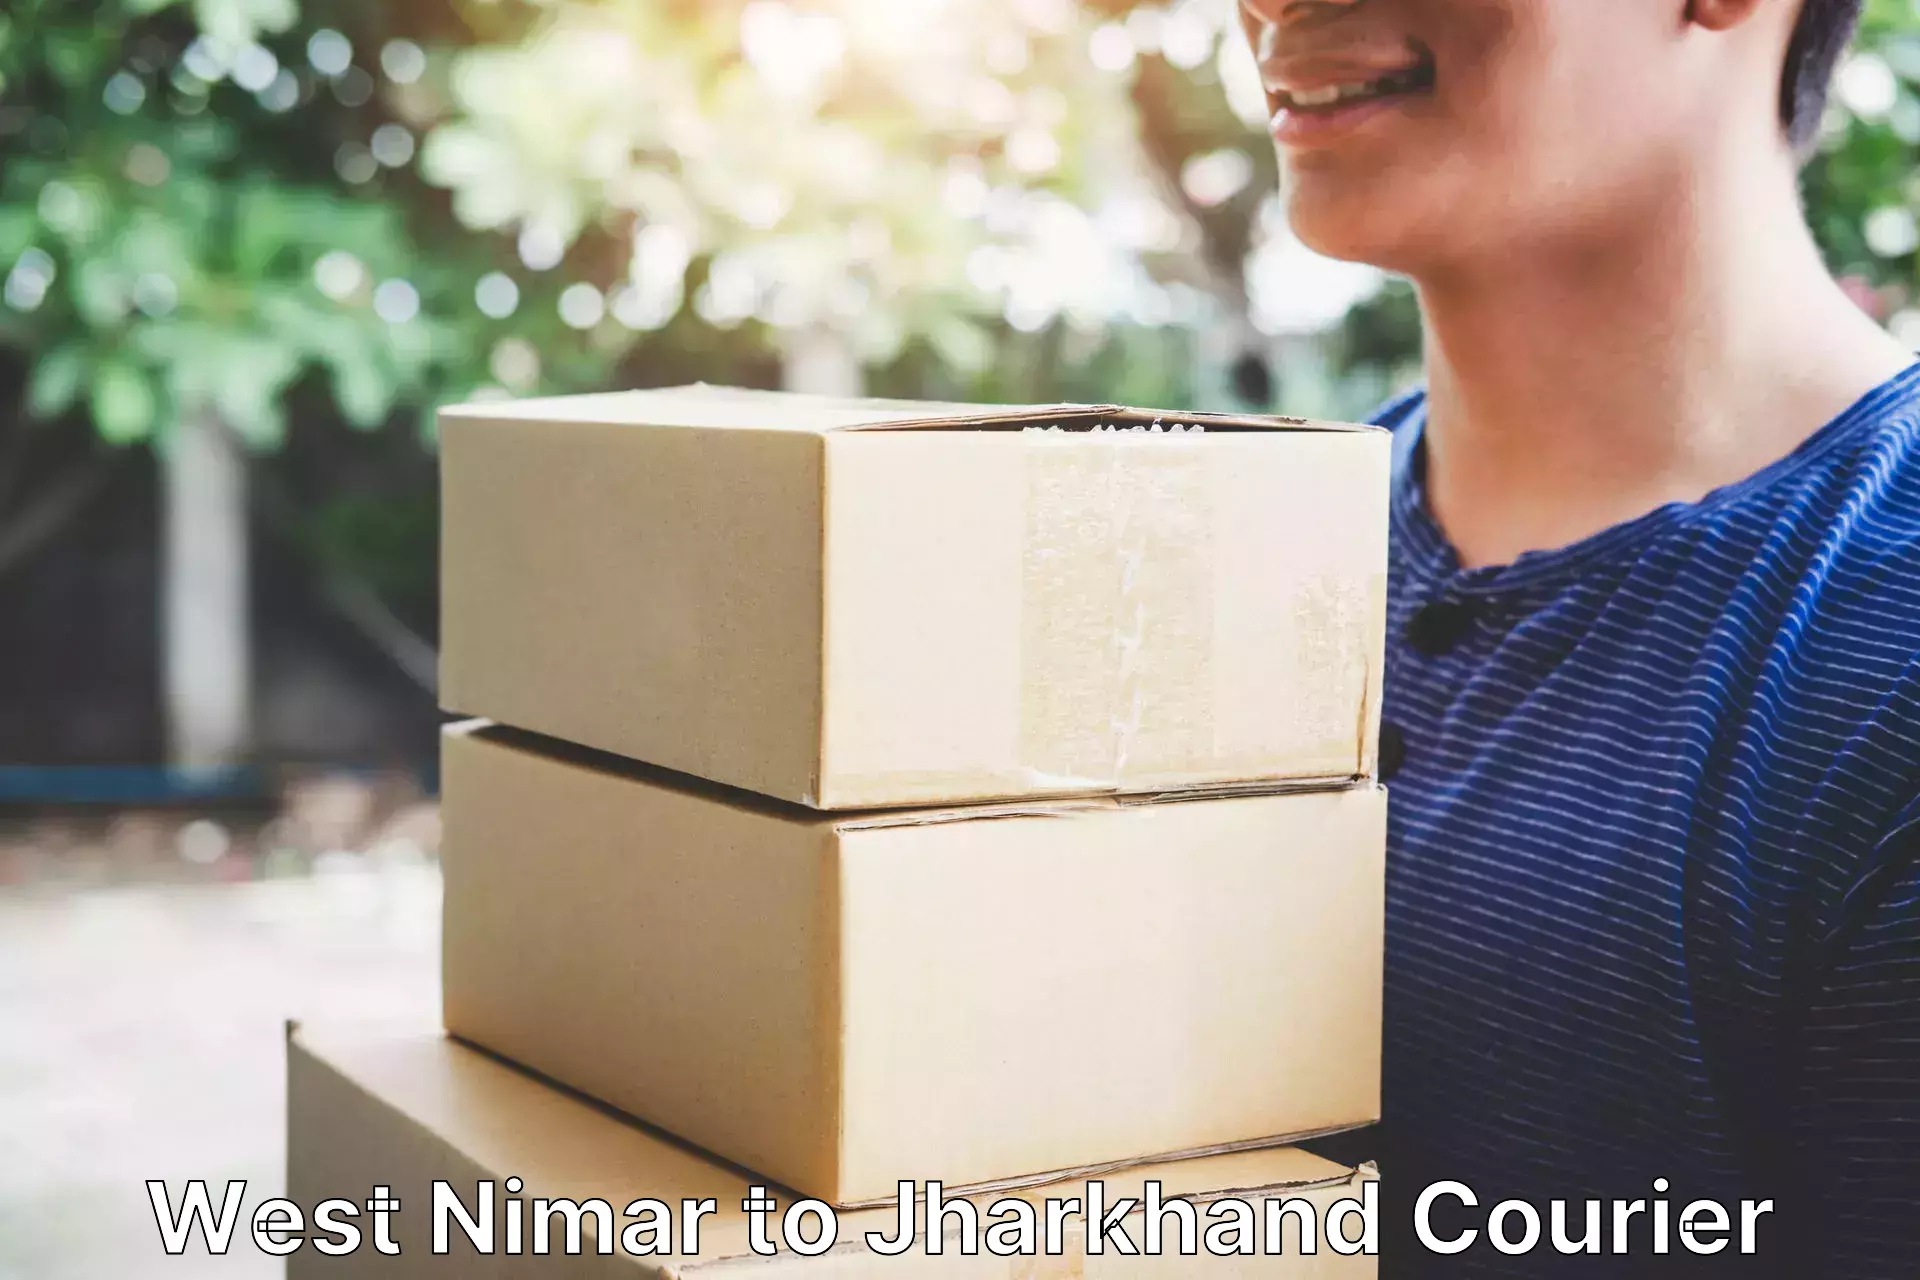 Baggage transport network West Nimar to Jharkhand